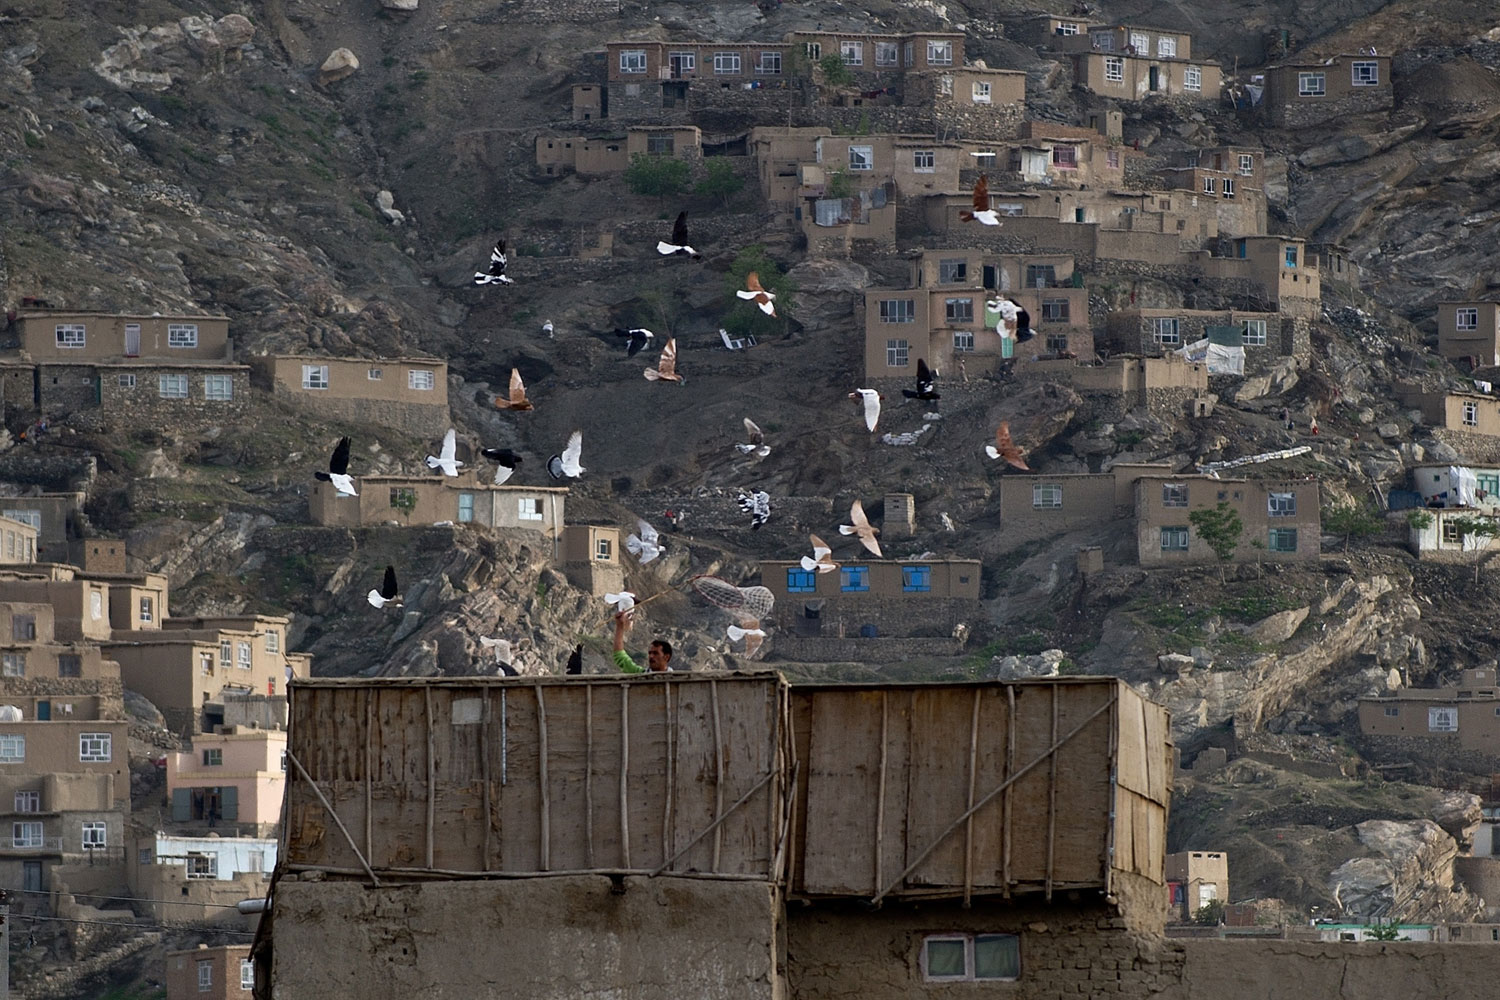 May 6, 2011.  An Afghan man catches pigeons on a rooftop in the old city of Kabul.